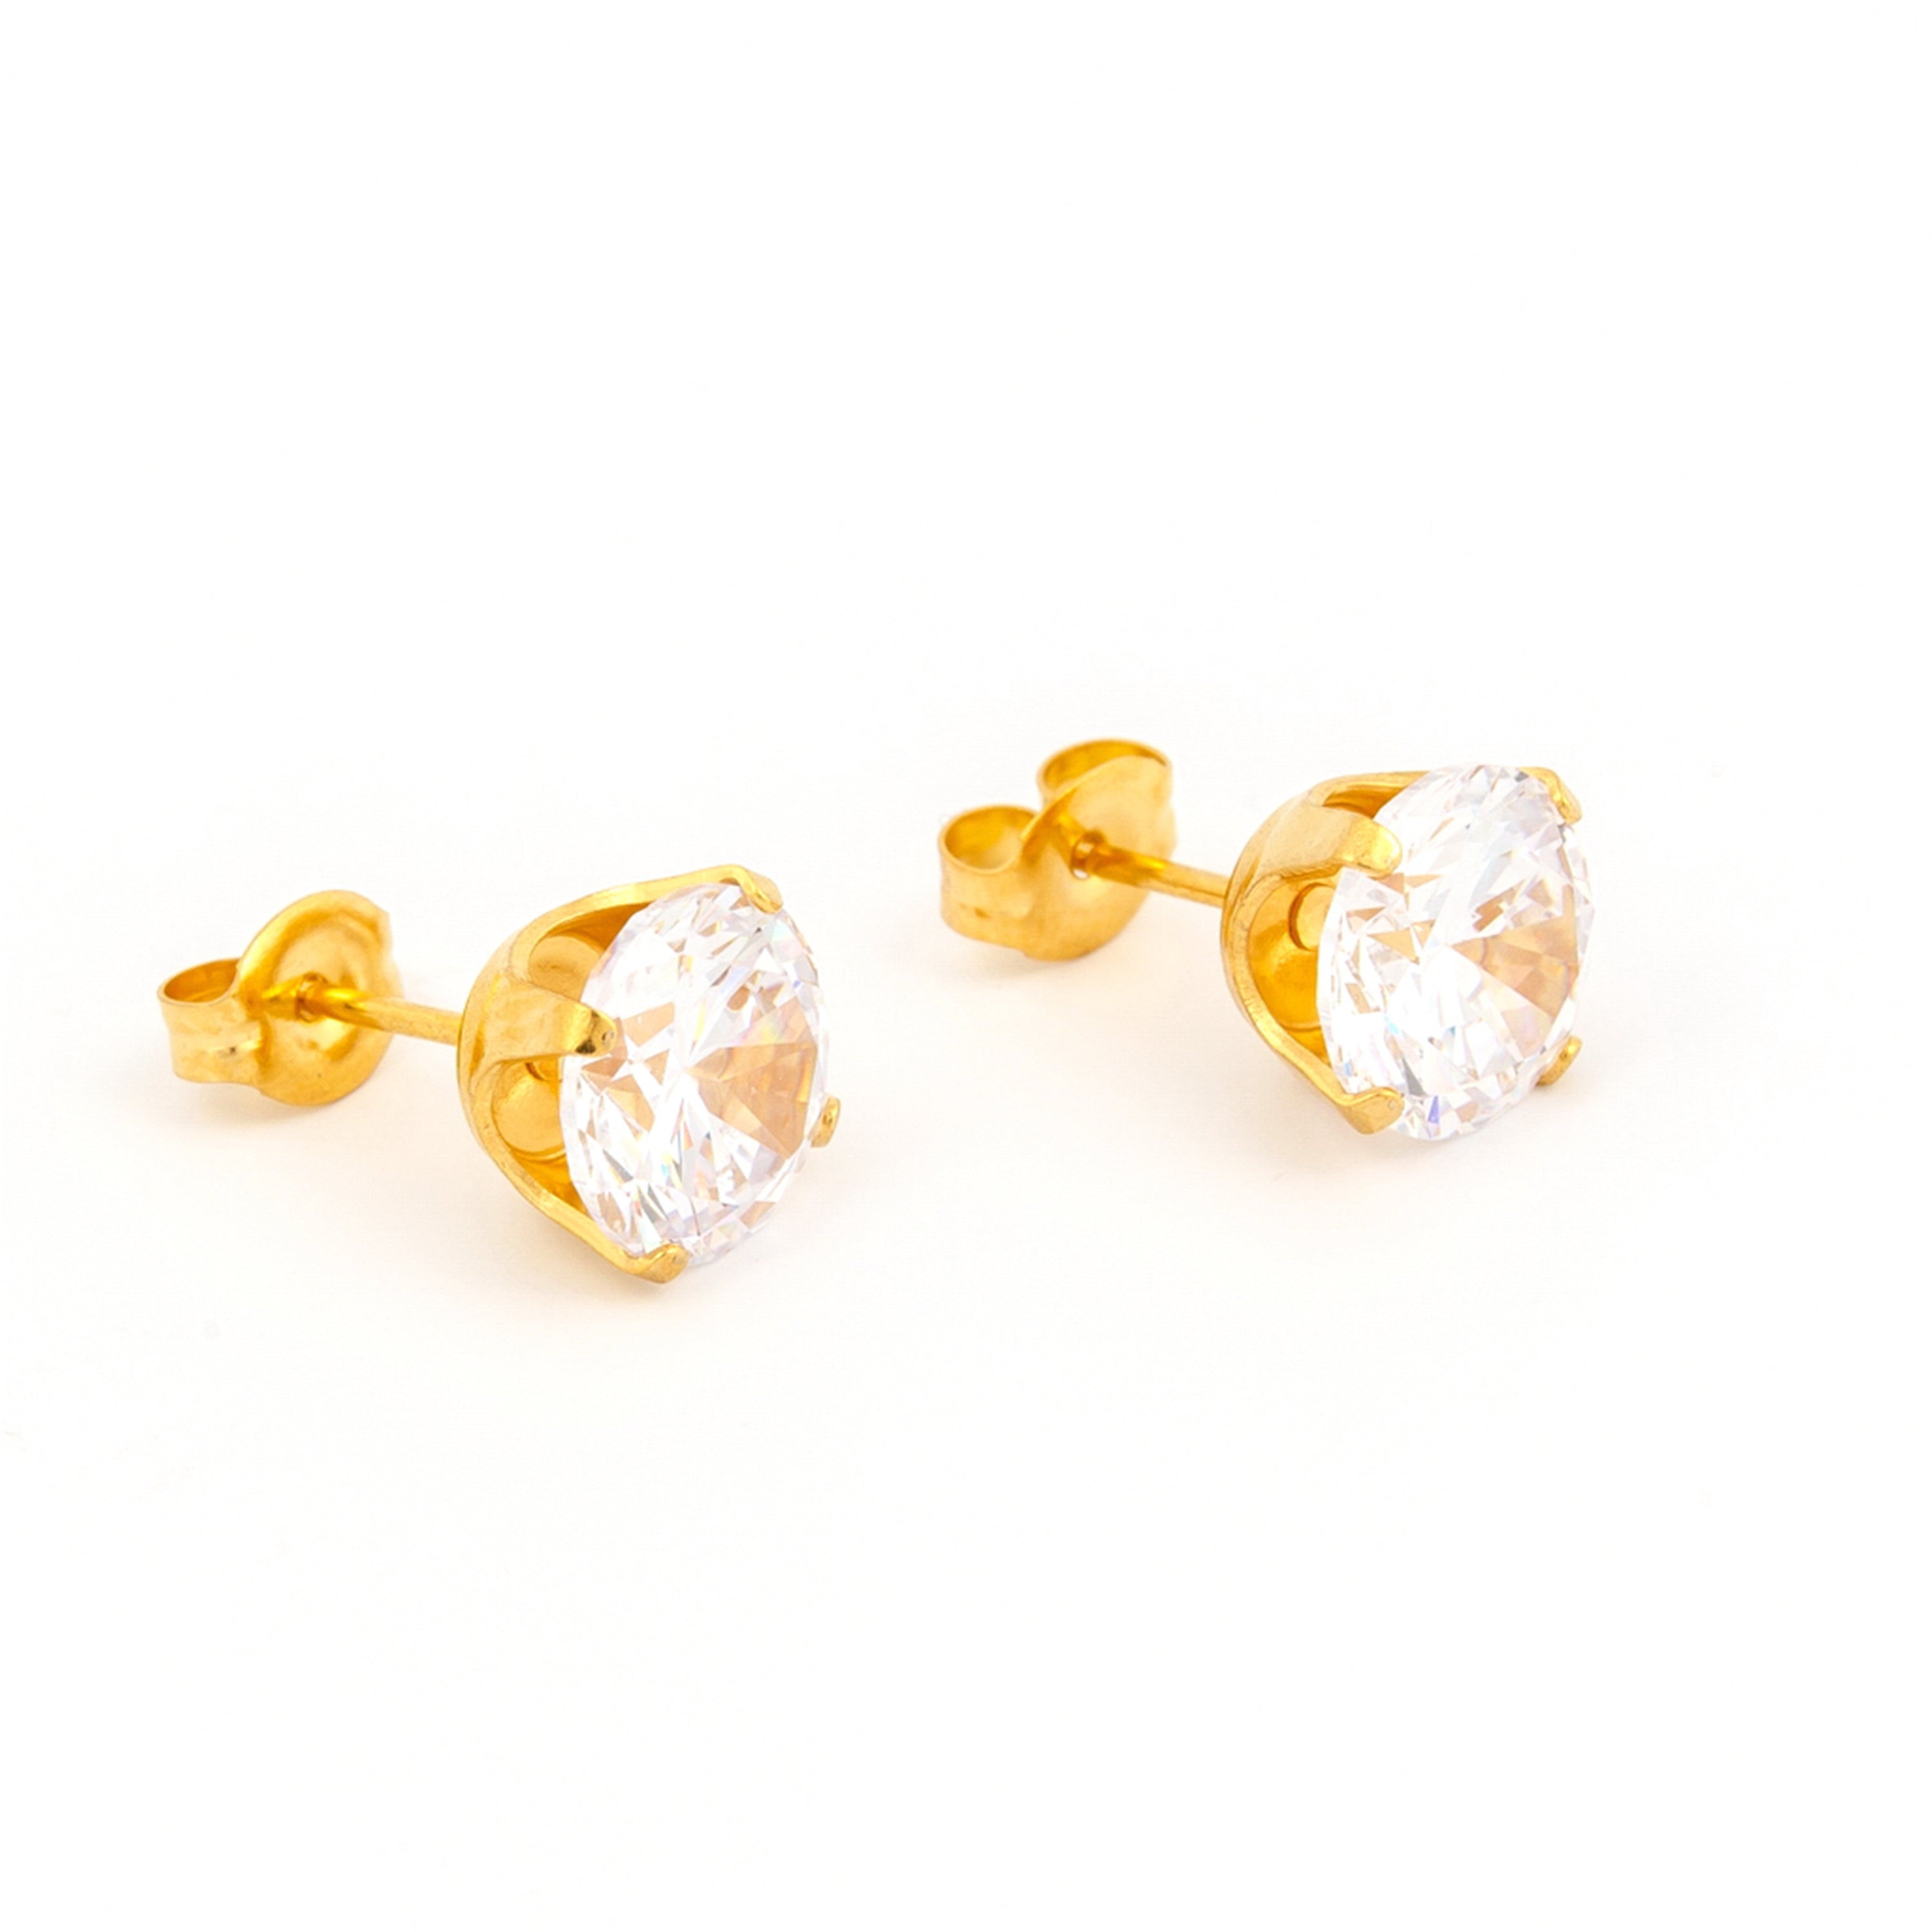 8MM Cubic Zirconia 24K Pure Gold Plated Ear Studs | MADE IN USA | Ideal for everyday wear